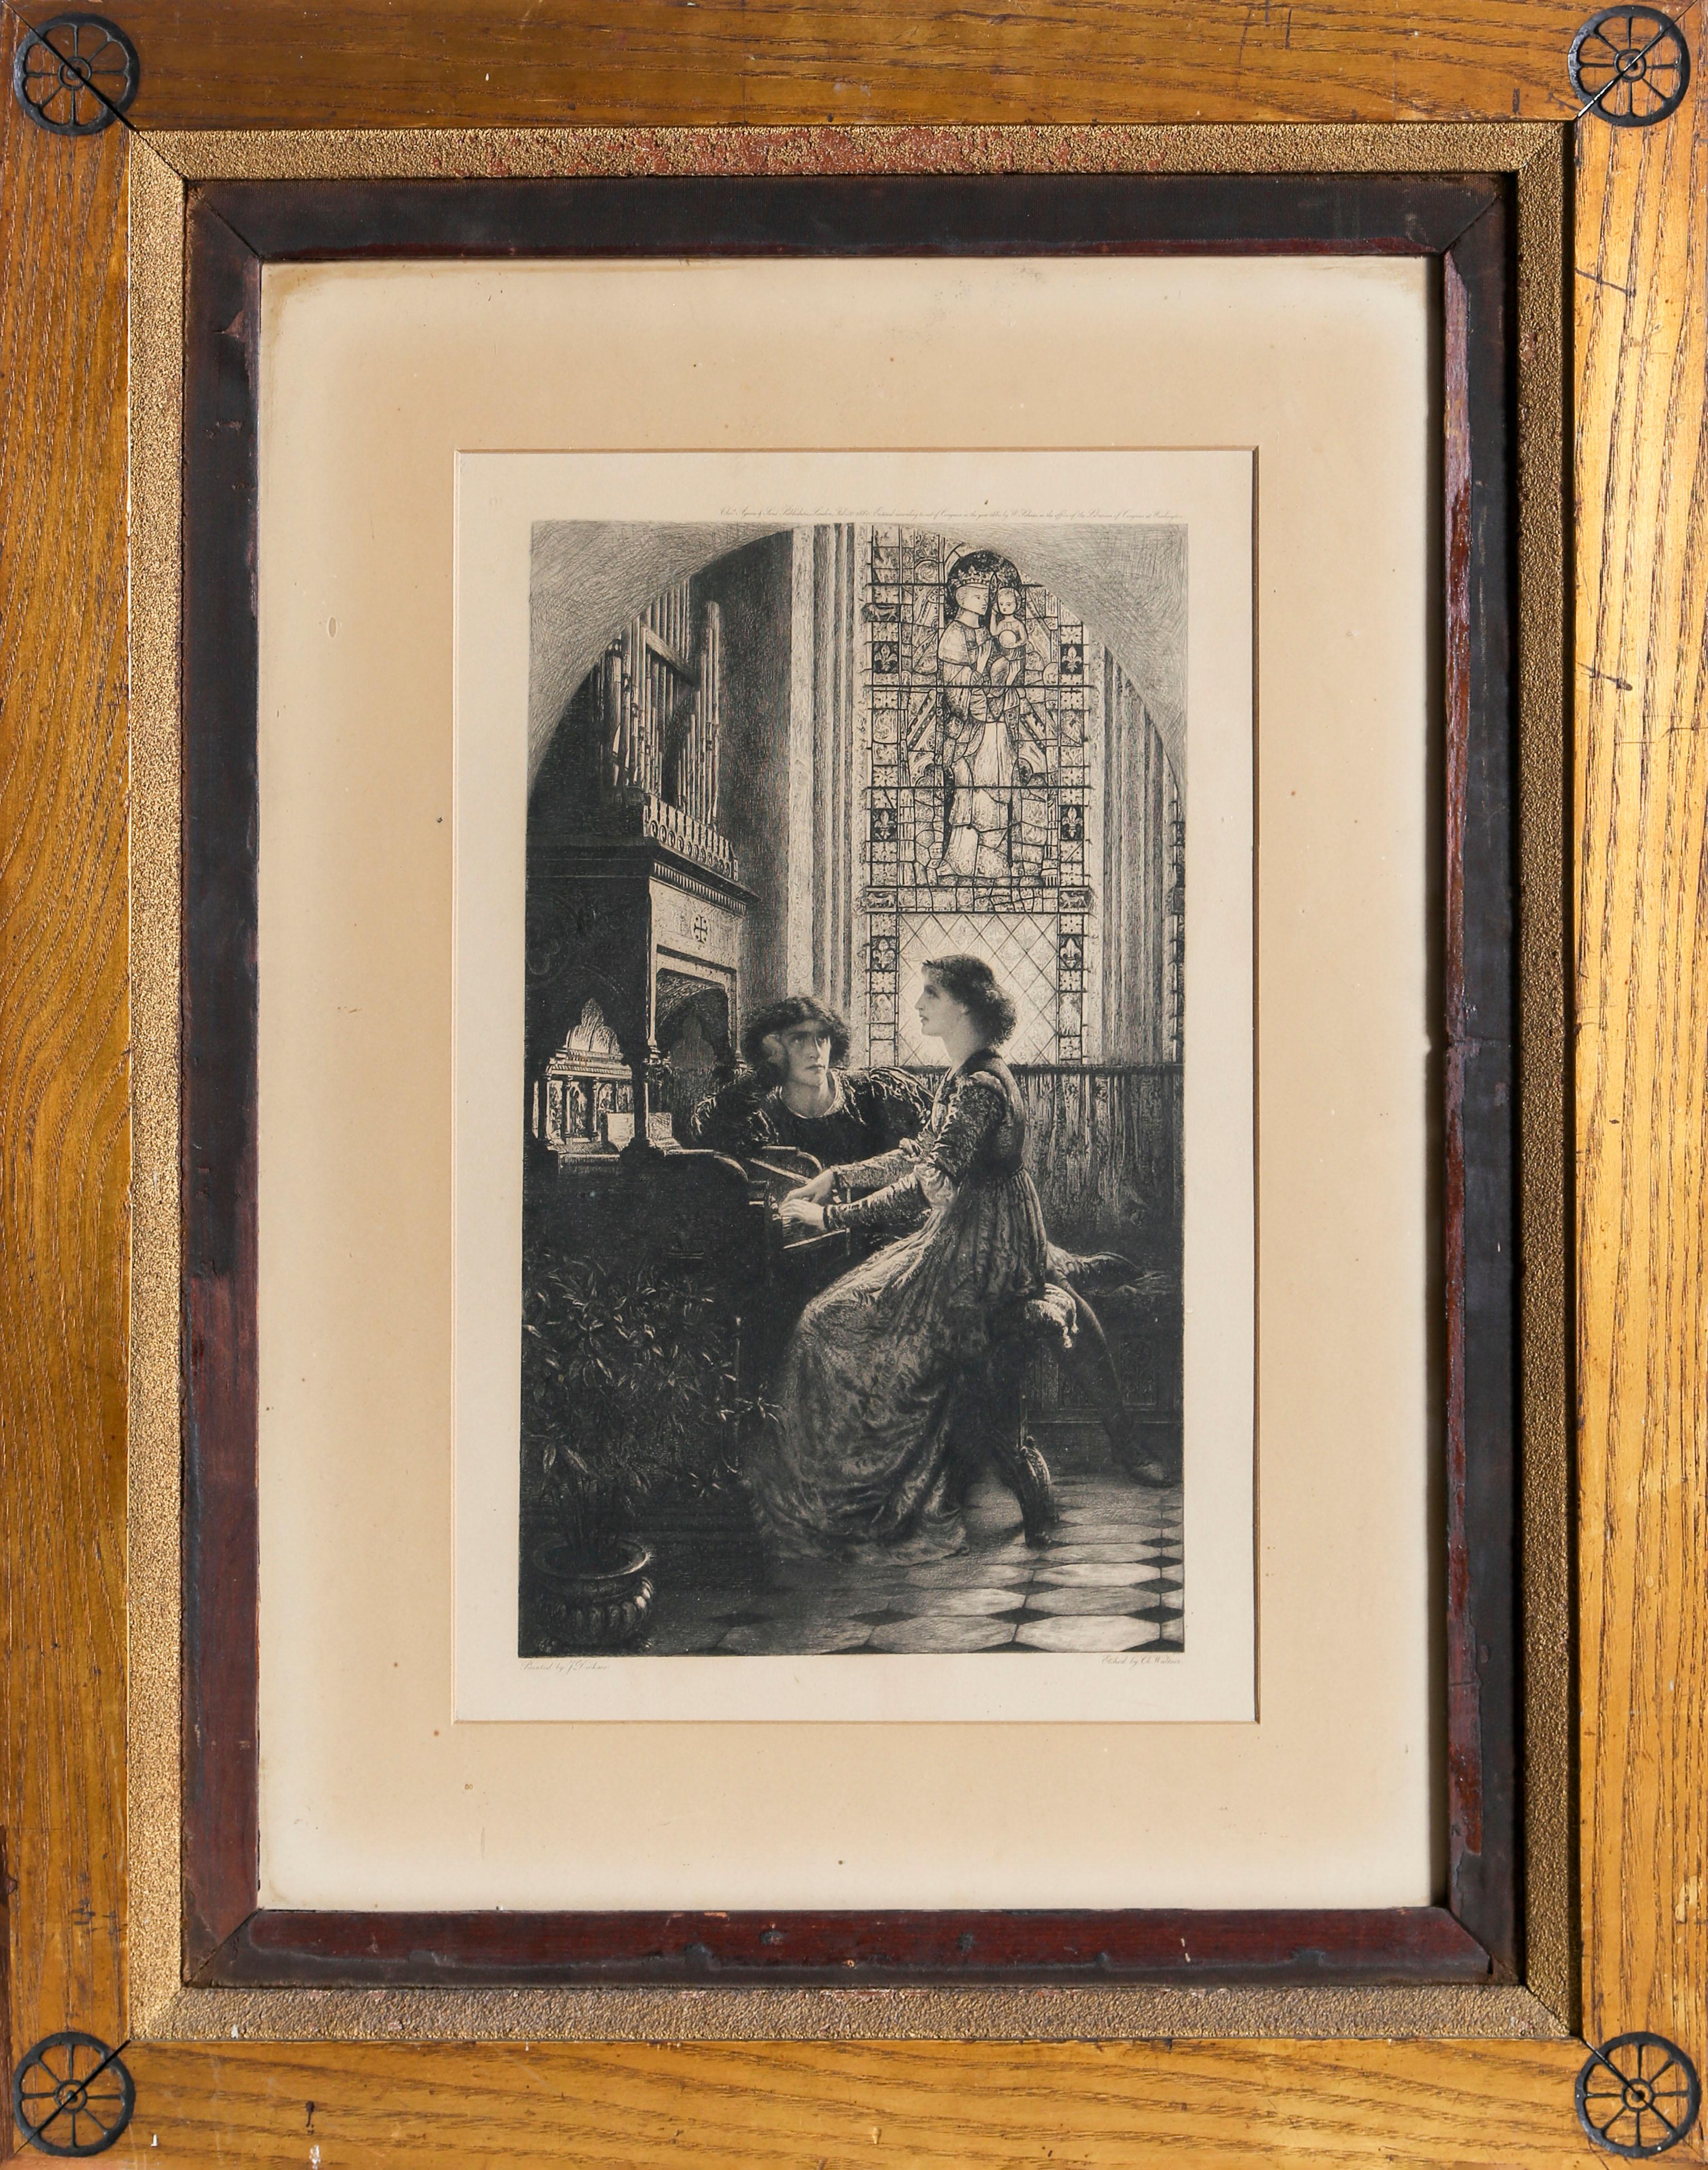 This is an etched rendition of a painting by Frank Dicksee. Harmony is one of the most well-known pictures by Dicksee, depicting a young man staring adoringly into the eyes of a girl playing the organ. Originally titled 'Music', this piece was